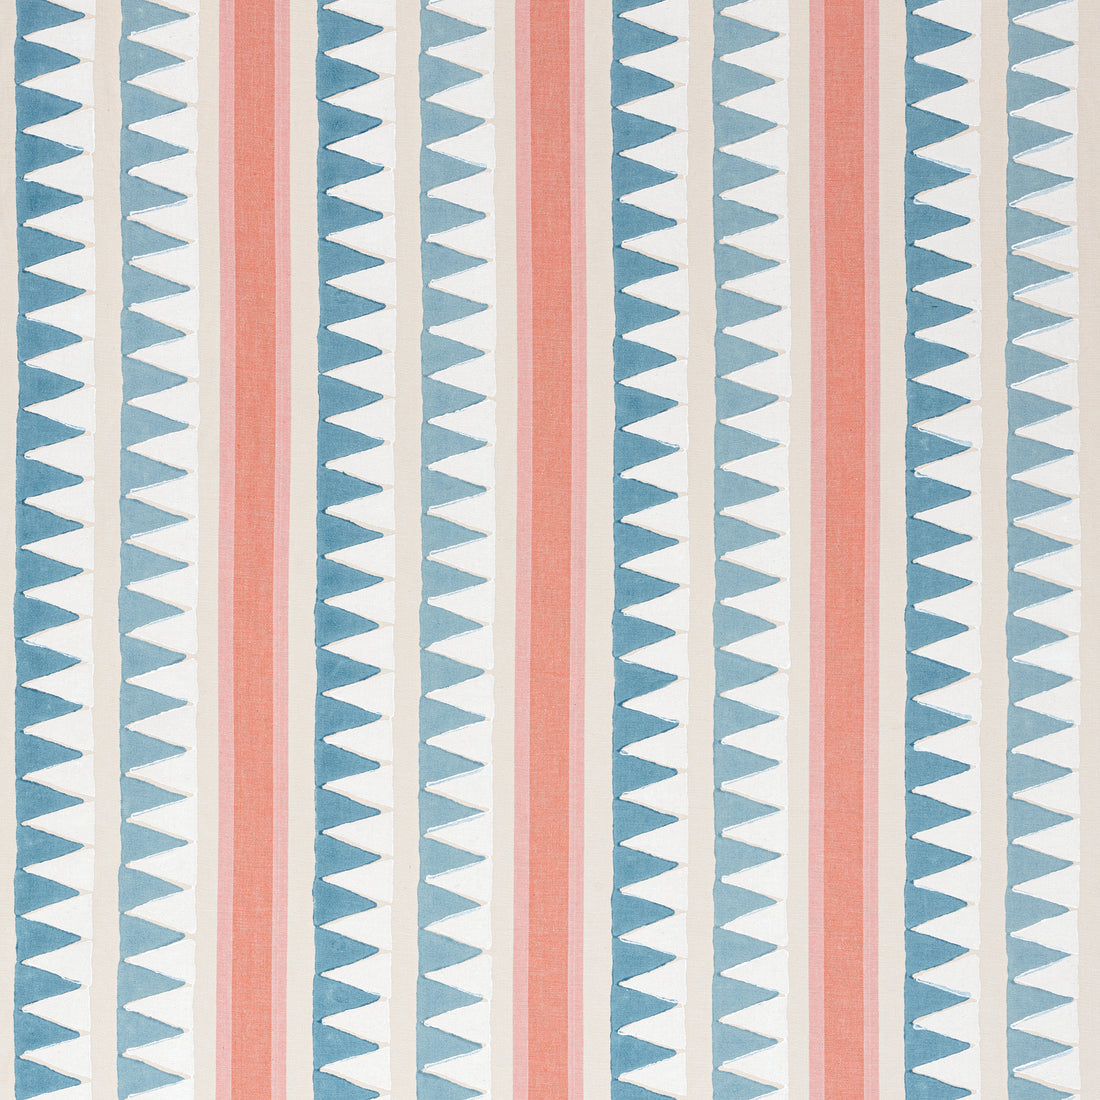 Lomita Stripe fabric in french blue and coral color - pattern number F916237 - by Thibaut in the Kismet collection